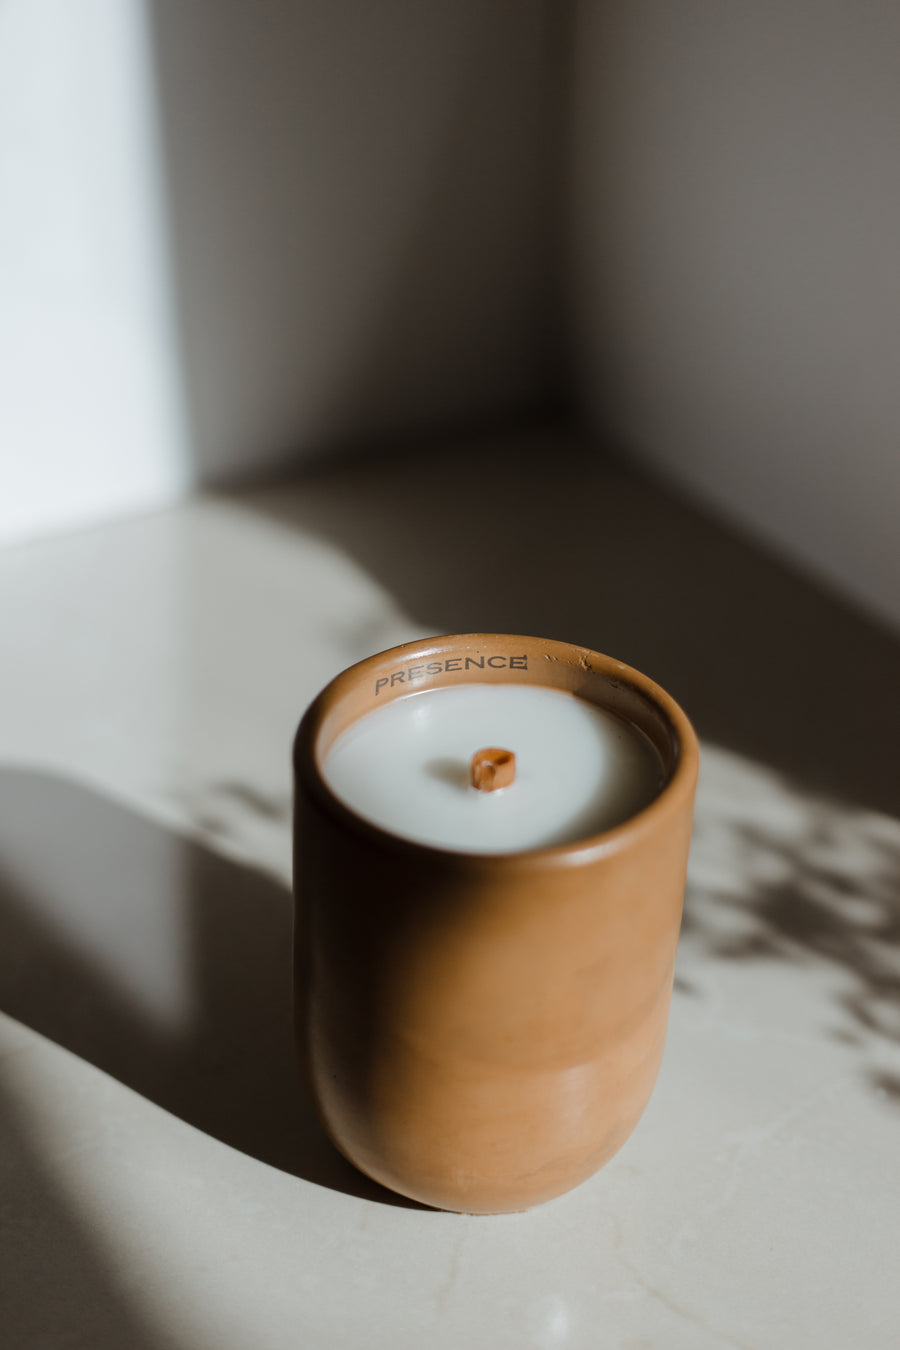 Presence Scented Candle | Cement Vessel